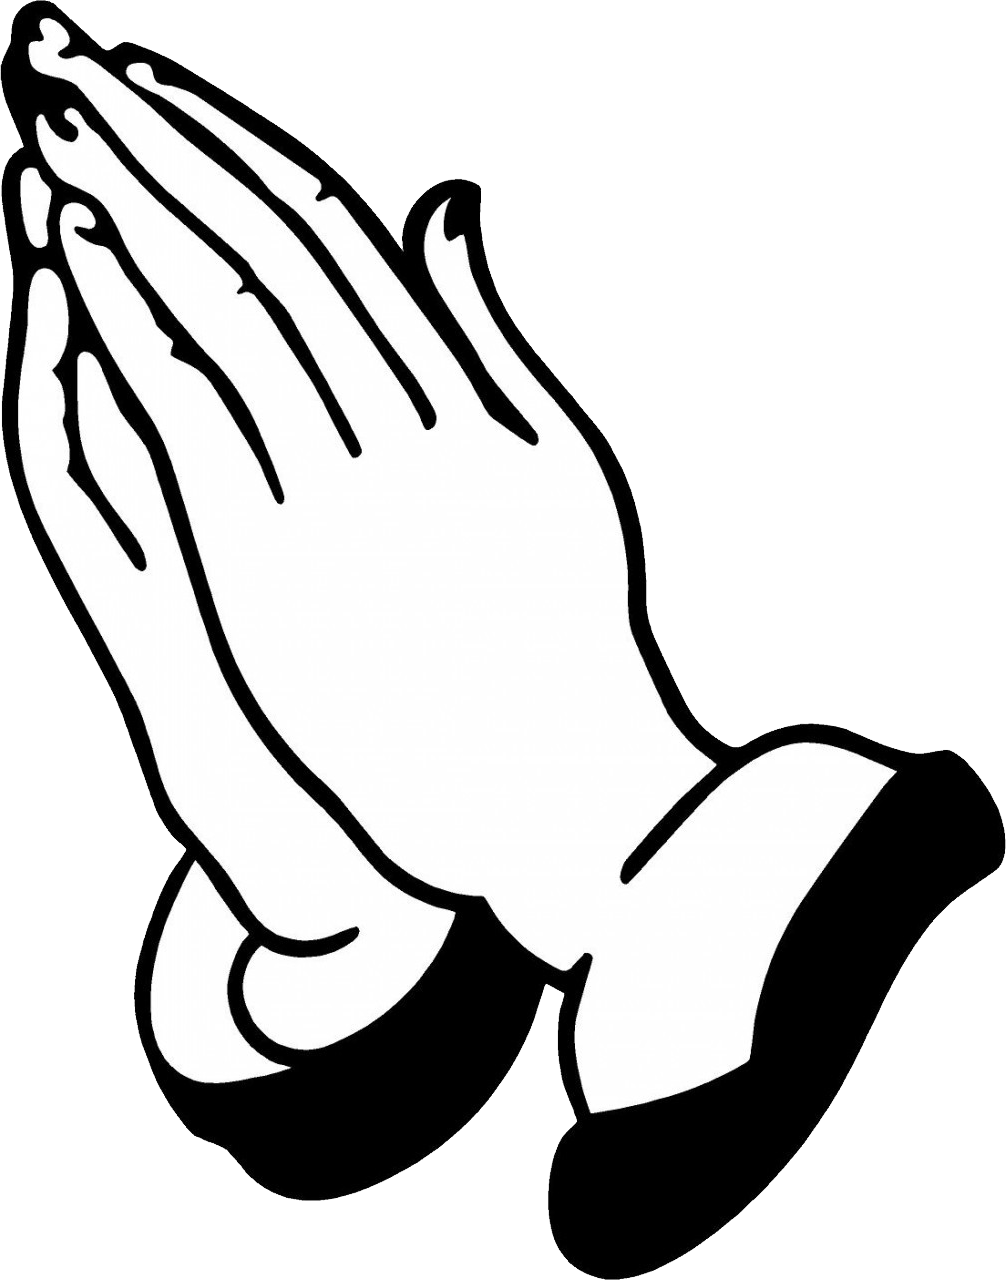 Praying hands PNG transparent image download, size: 1006x1280px